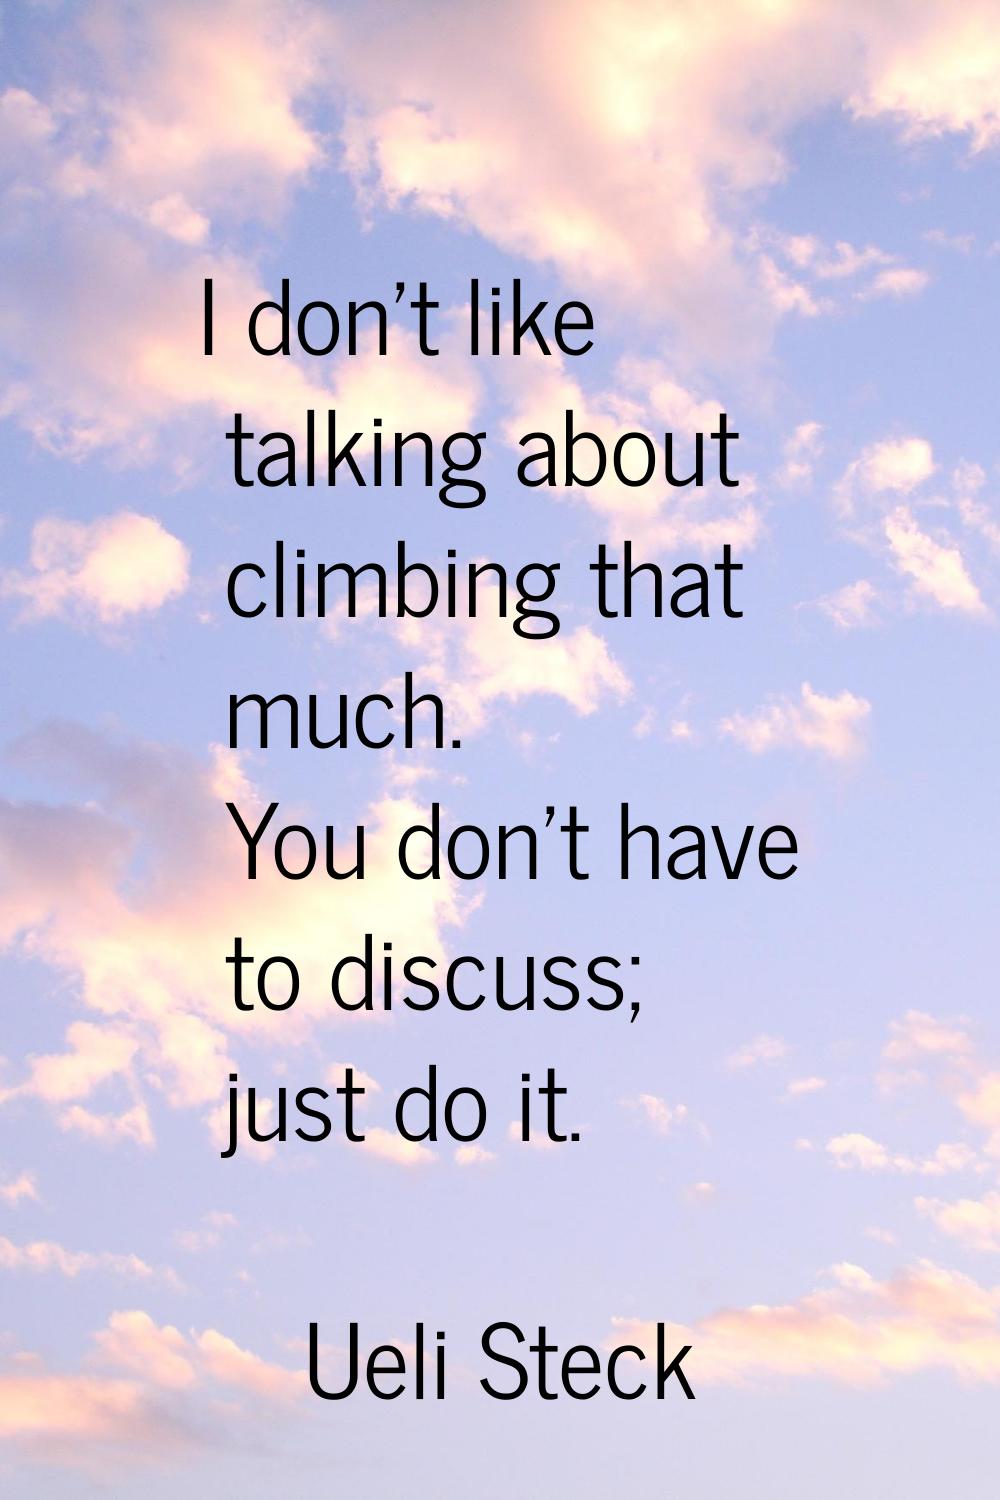 I don't like talking about climbing that much. You don't have to discuss; just do it.